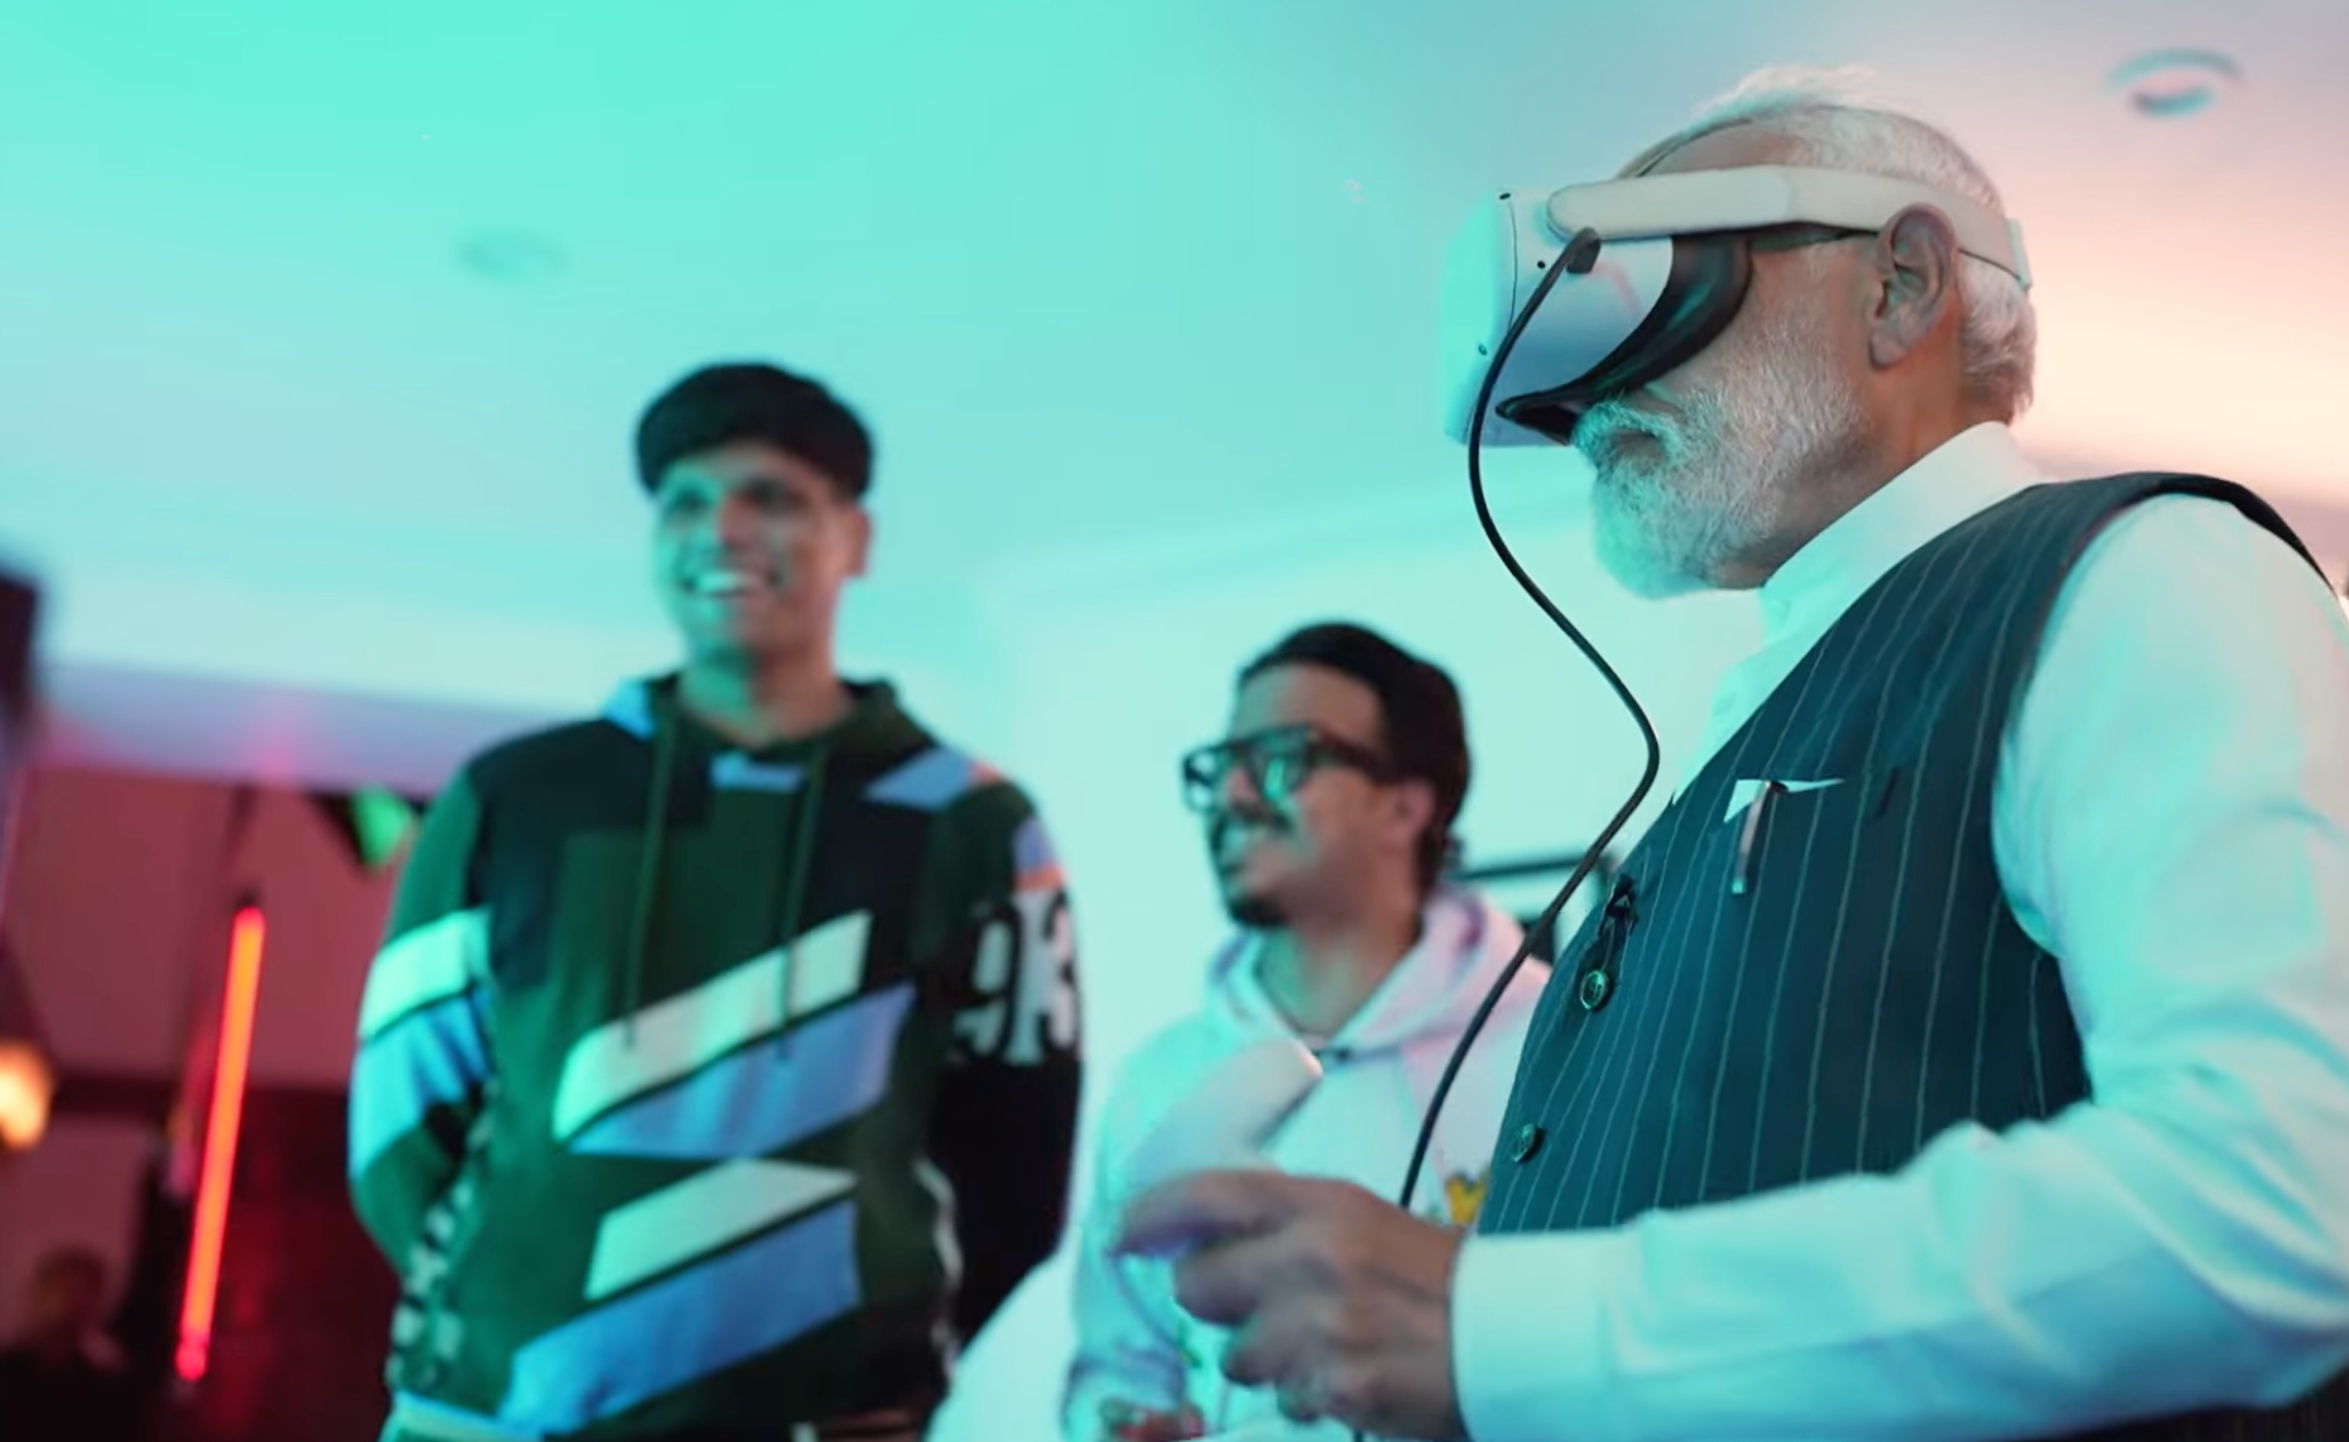 PM Modi playing virtual reality with Indian gaming community